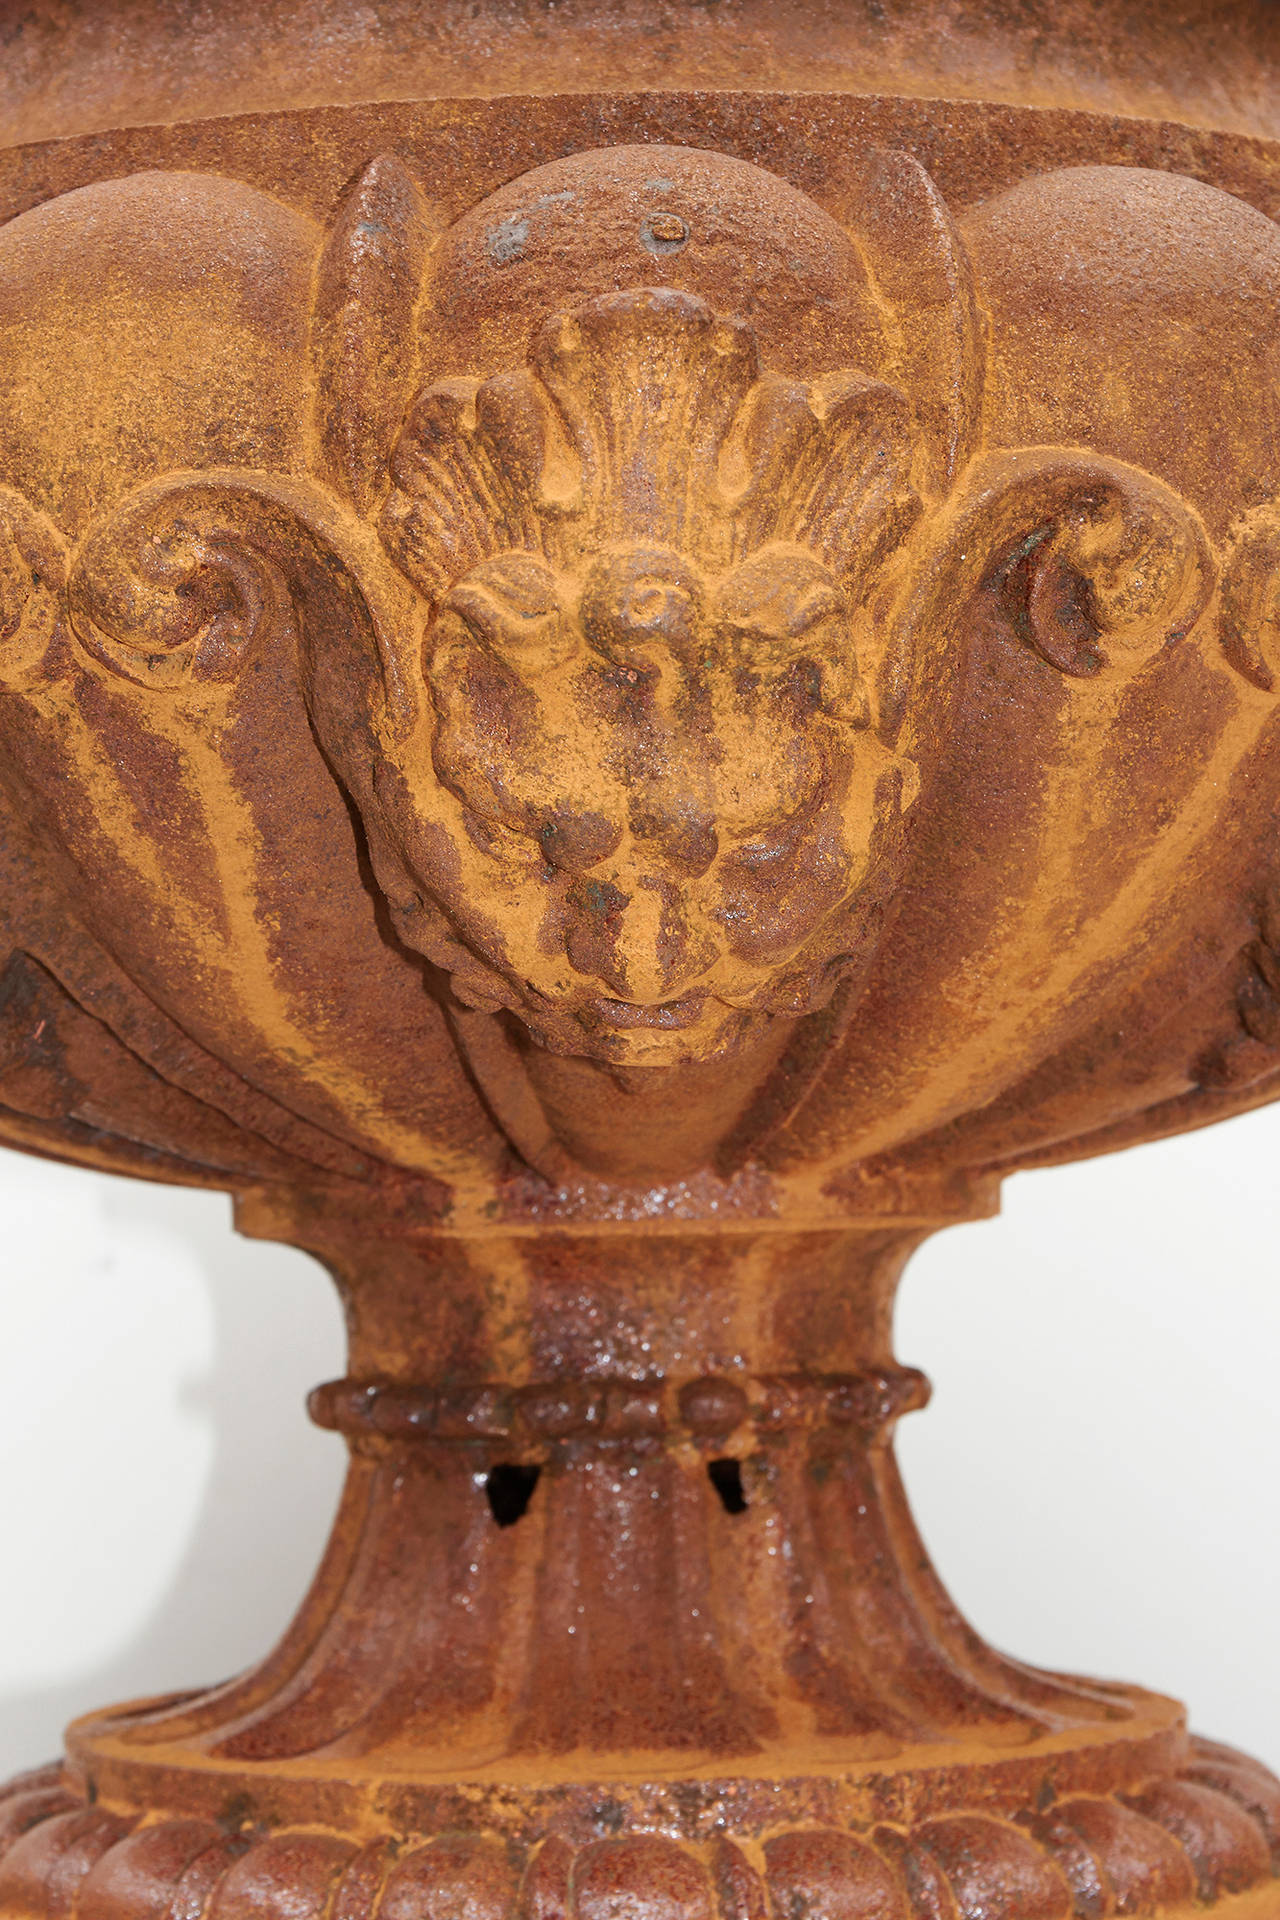 Unusual pair of early cast iron urns by the Ducell foundry in the mid-19th century with the bowl surrounded by faces.

Dimensions: 17 in. diameter.
10 in. opening.